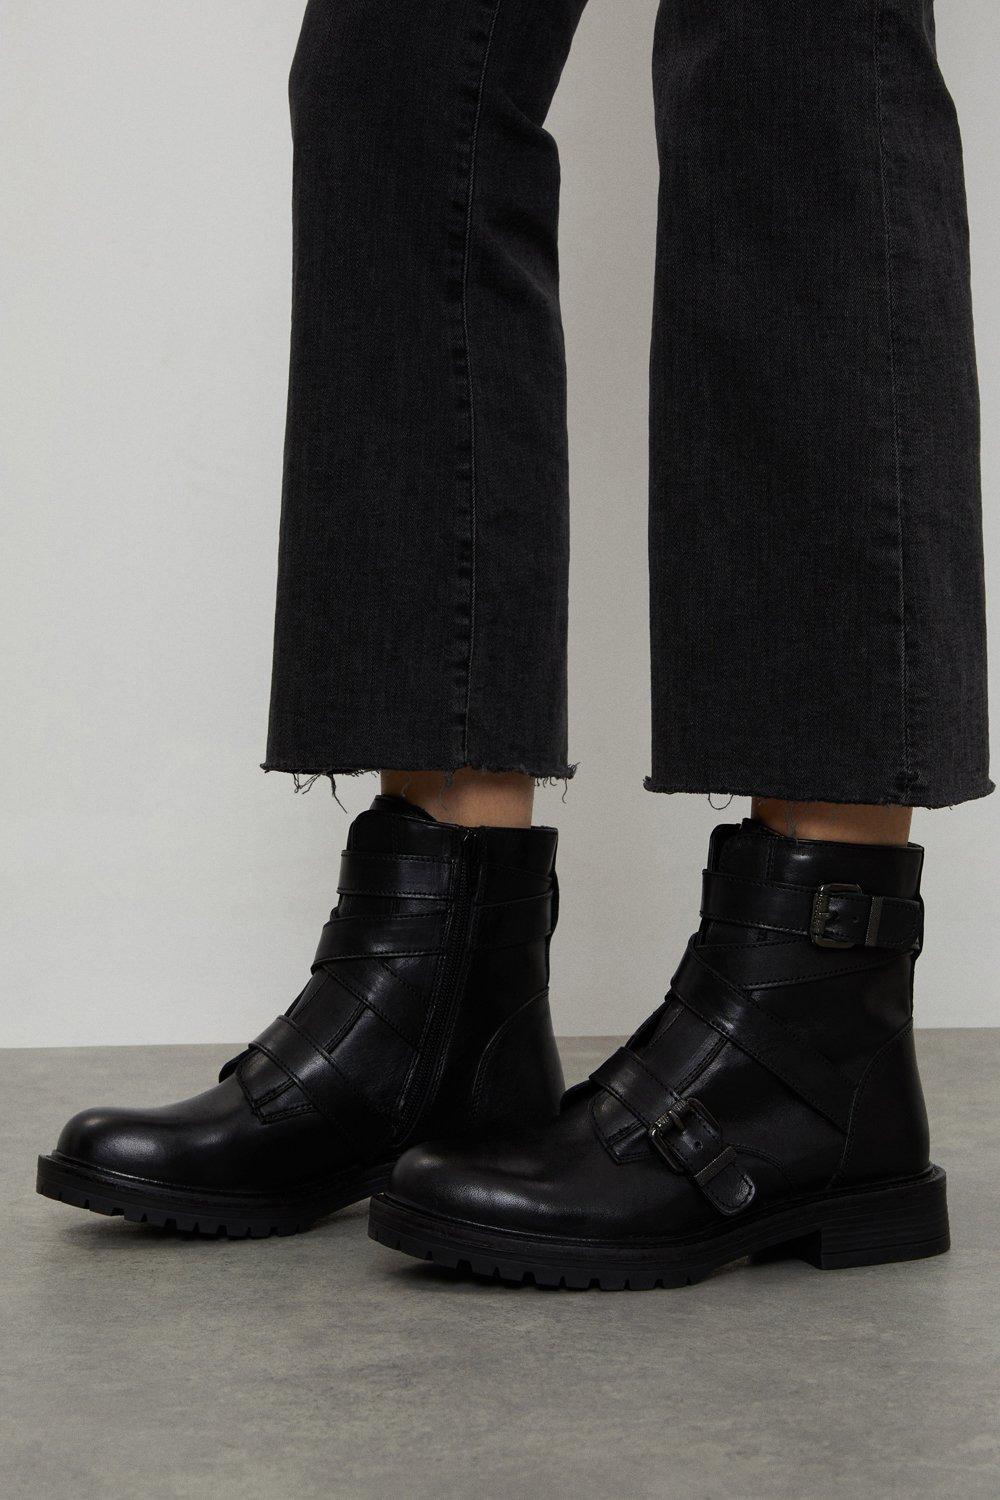 Boots | Good For The Sole: Rowan Double Strap Leather Biker Boots ...